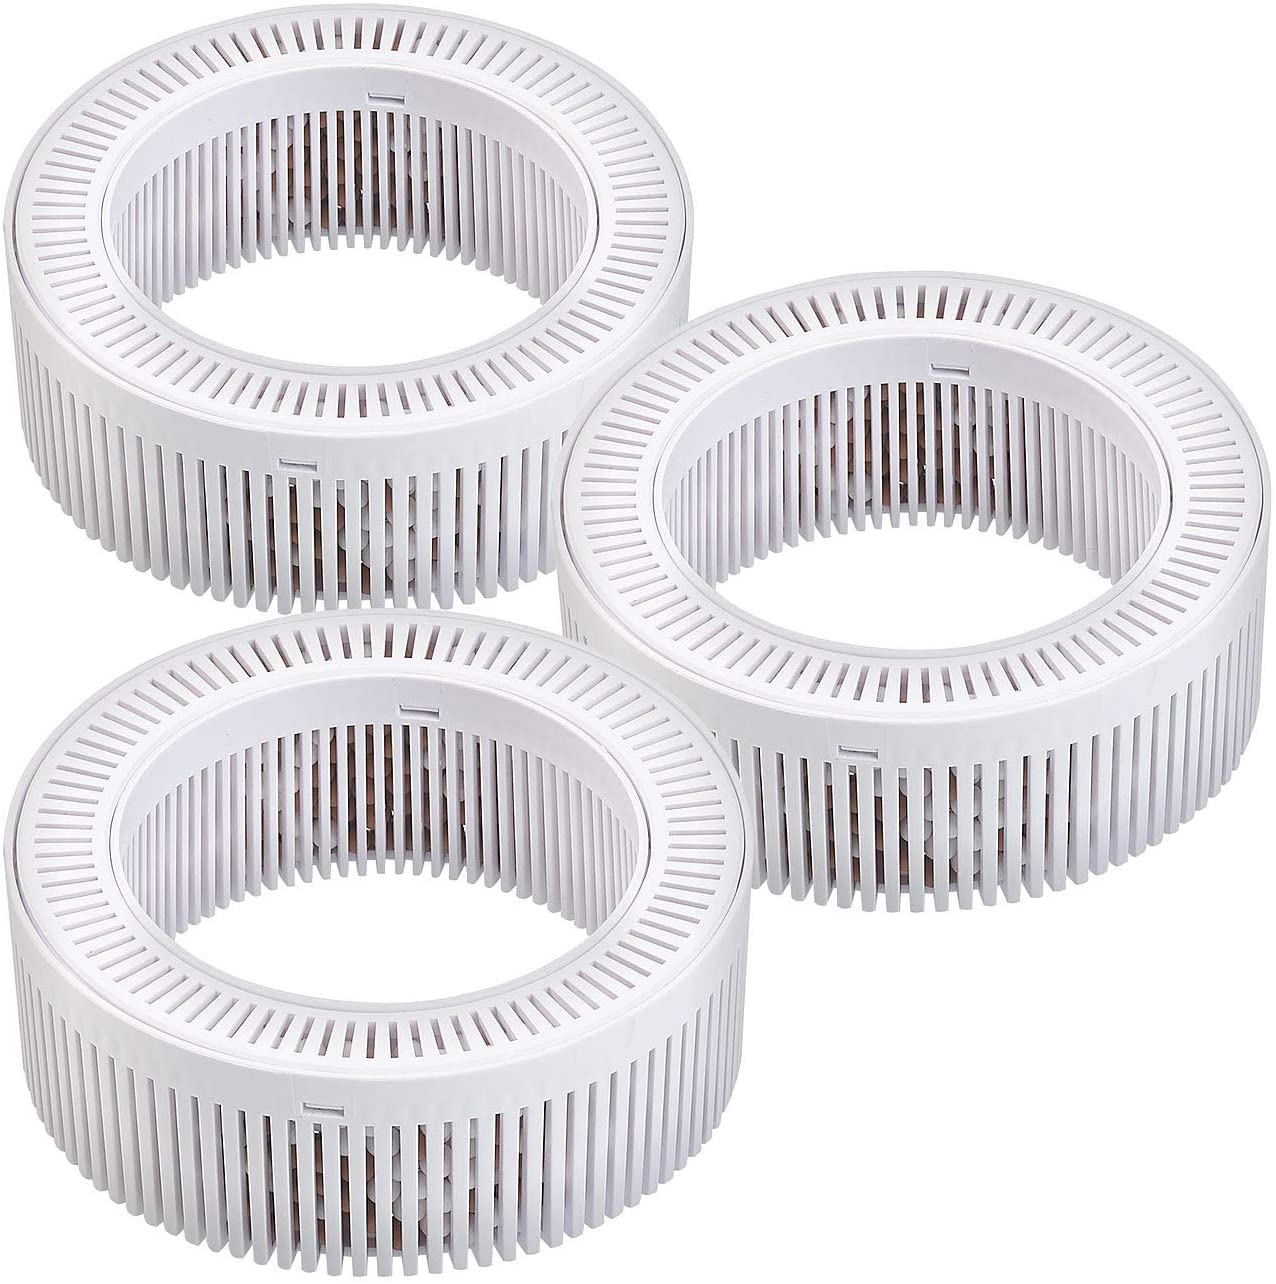 ROSENSTEIN & SOHNE Rosenstein & Söhne Accessories for Water Conditioner: Set of 3 Replacement Filters for Hydrogen Ioniser WI-200 (Drinking Water Ioniser)